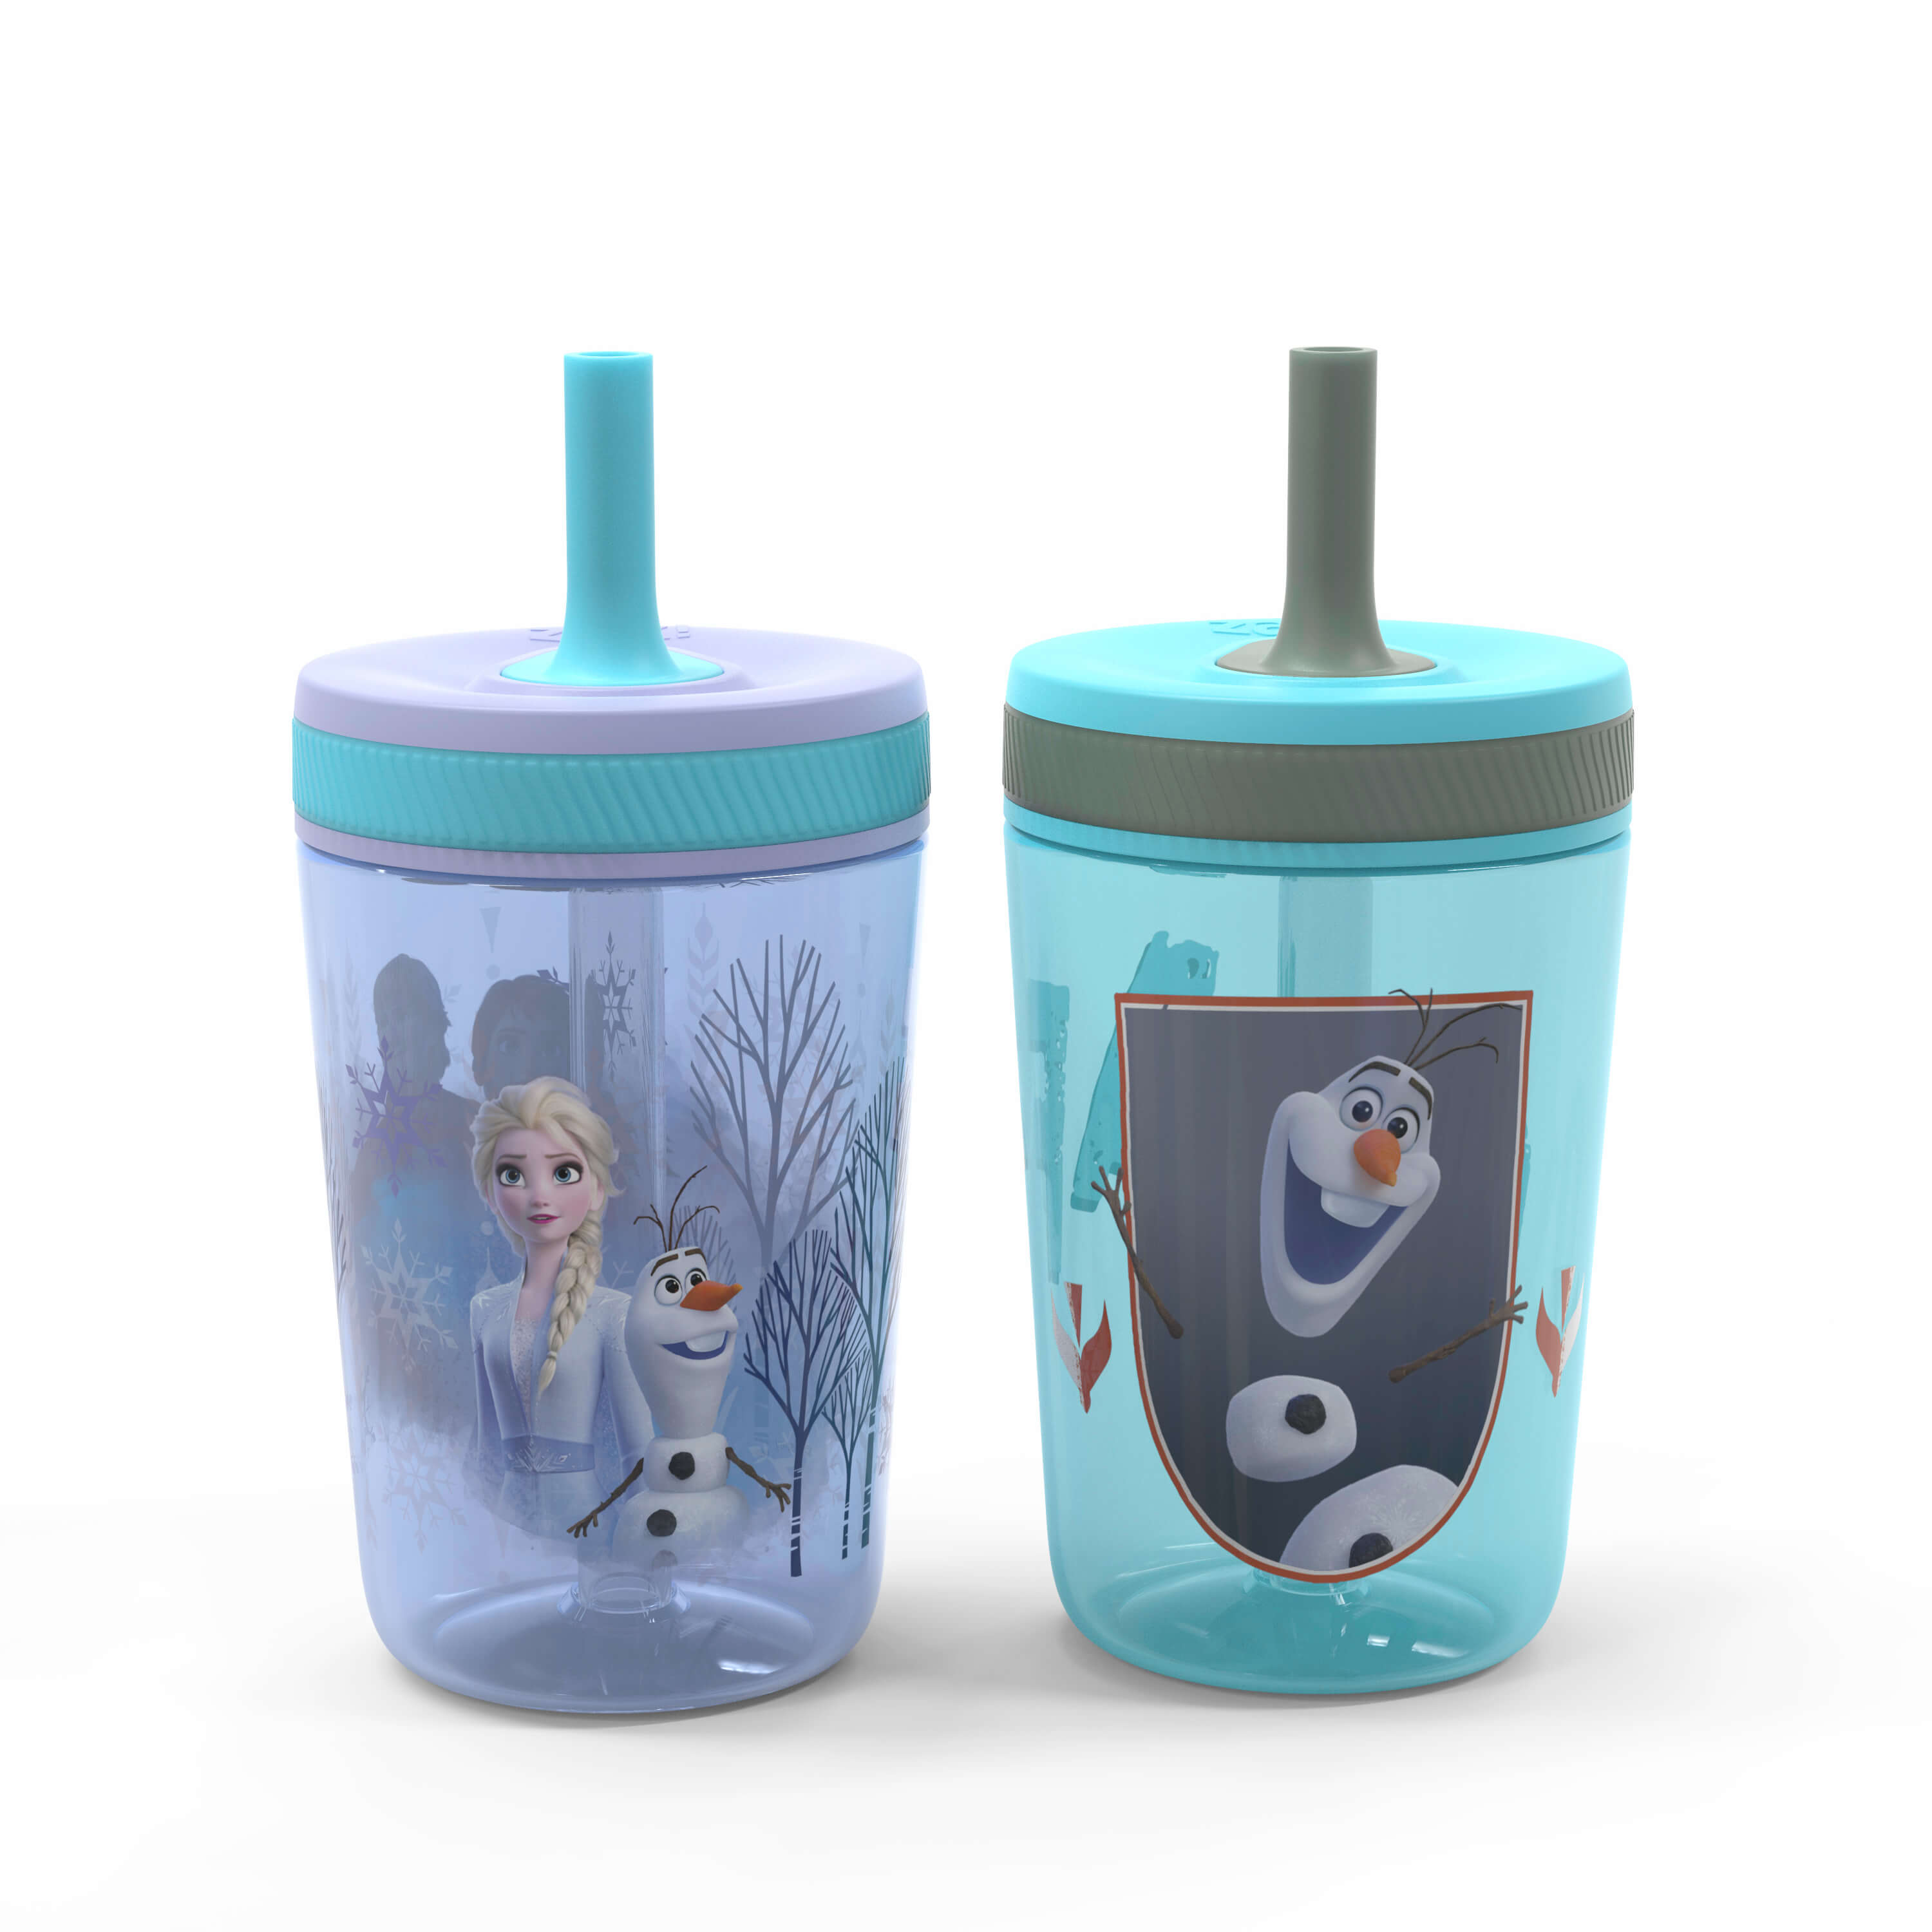 Zak Designs 12-oz. Stainless Steel Double-Wall Tumbler for Kids with  Antimicrobial Straw, 2-Piece Set (Assorted Colors)